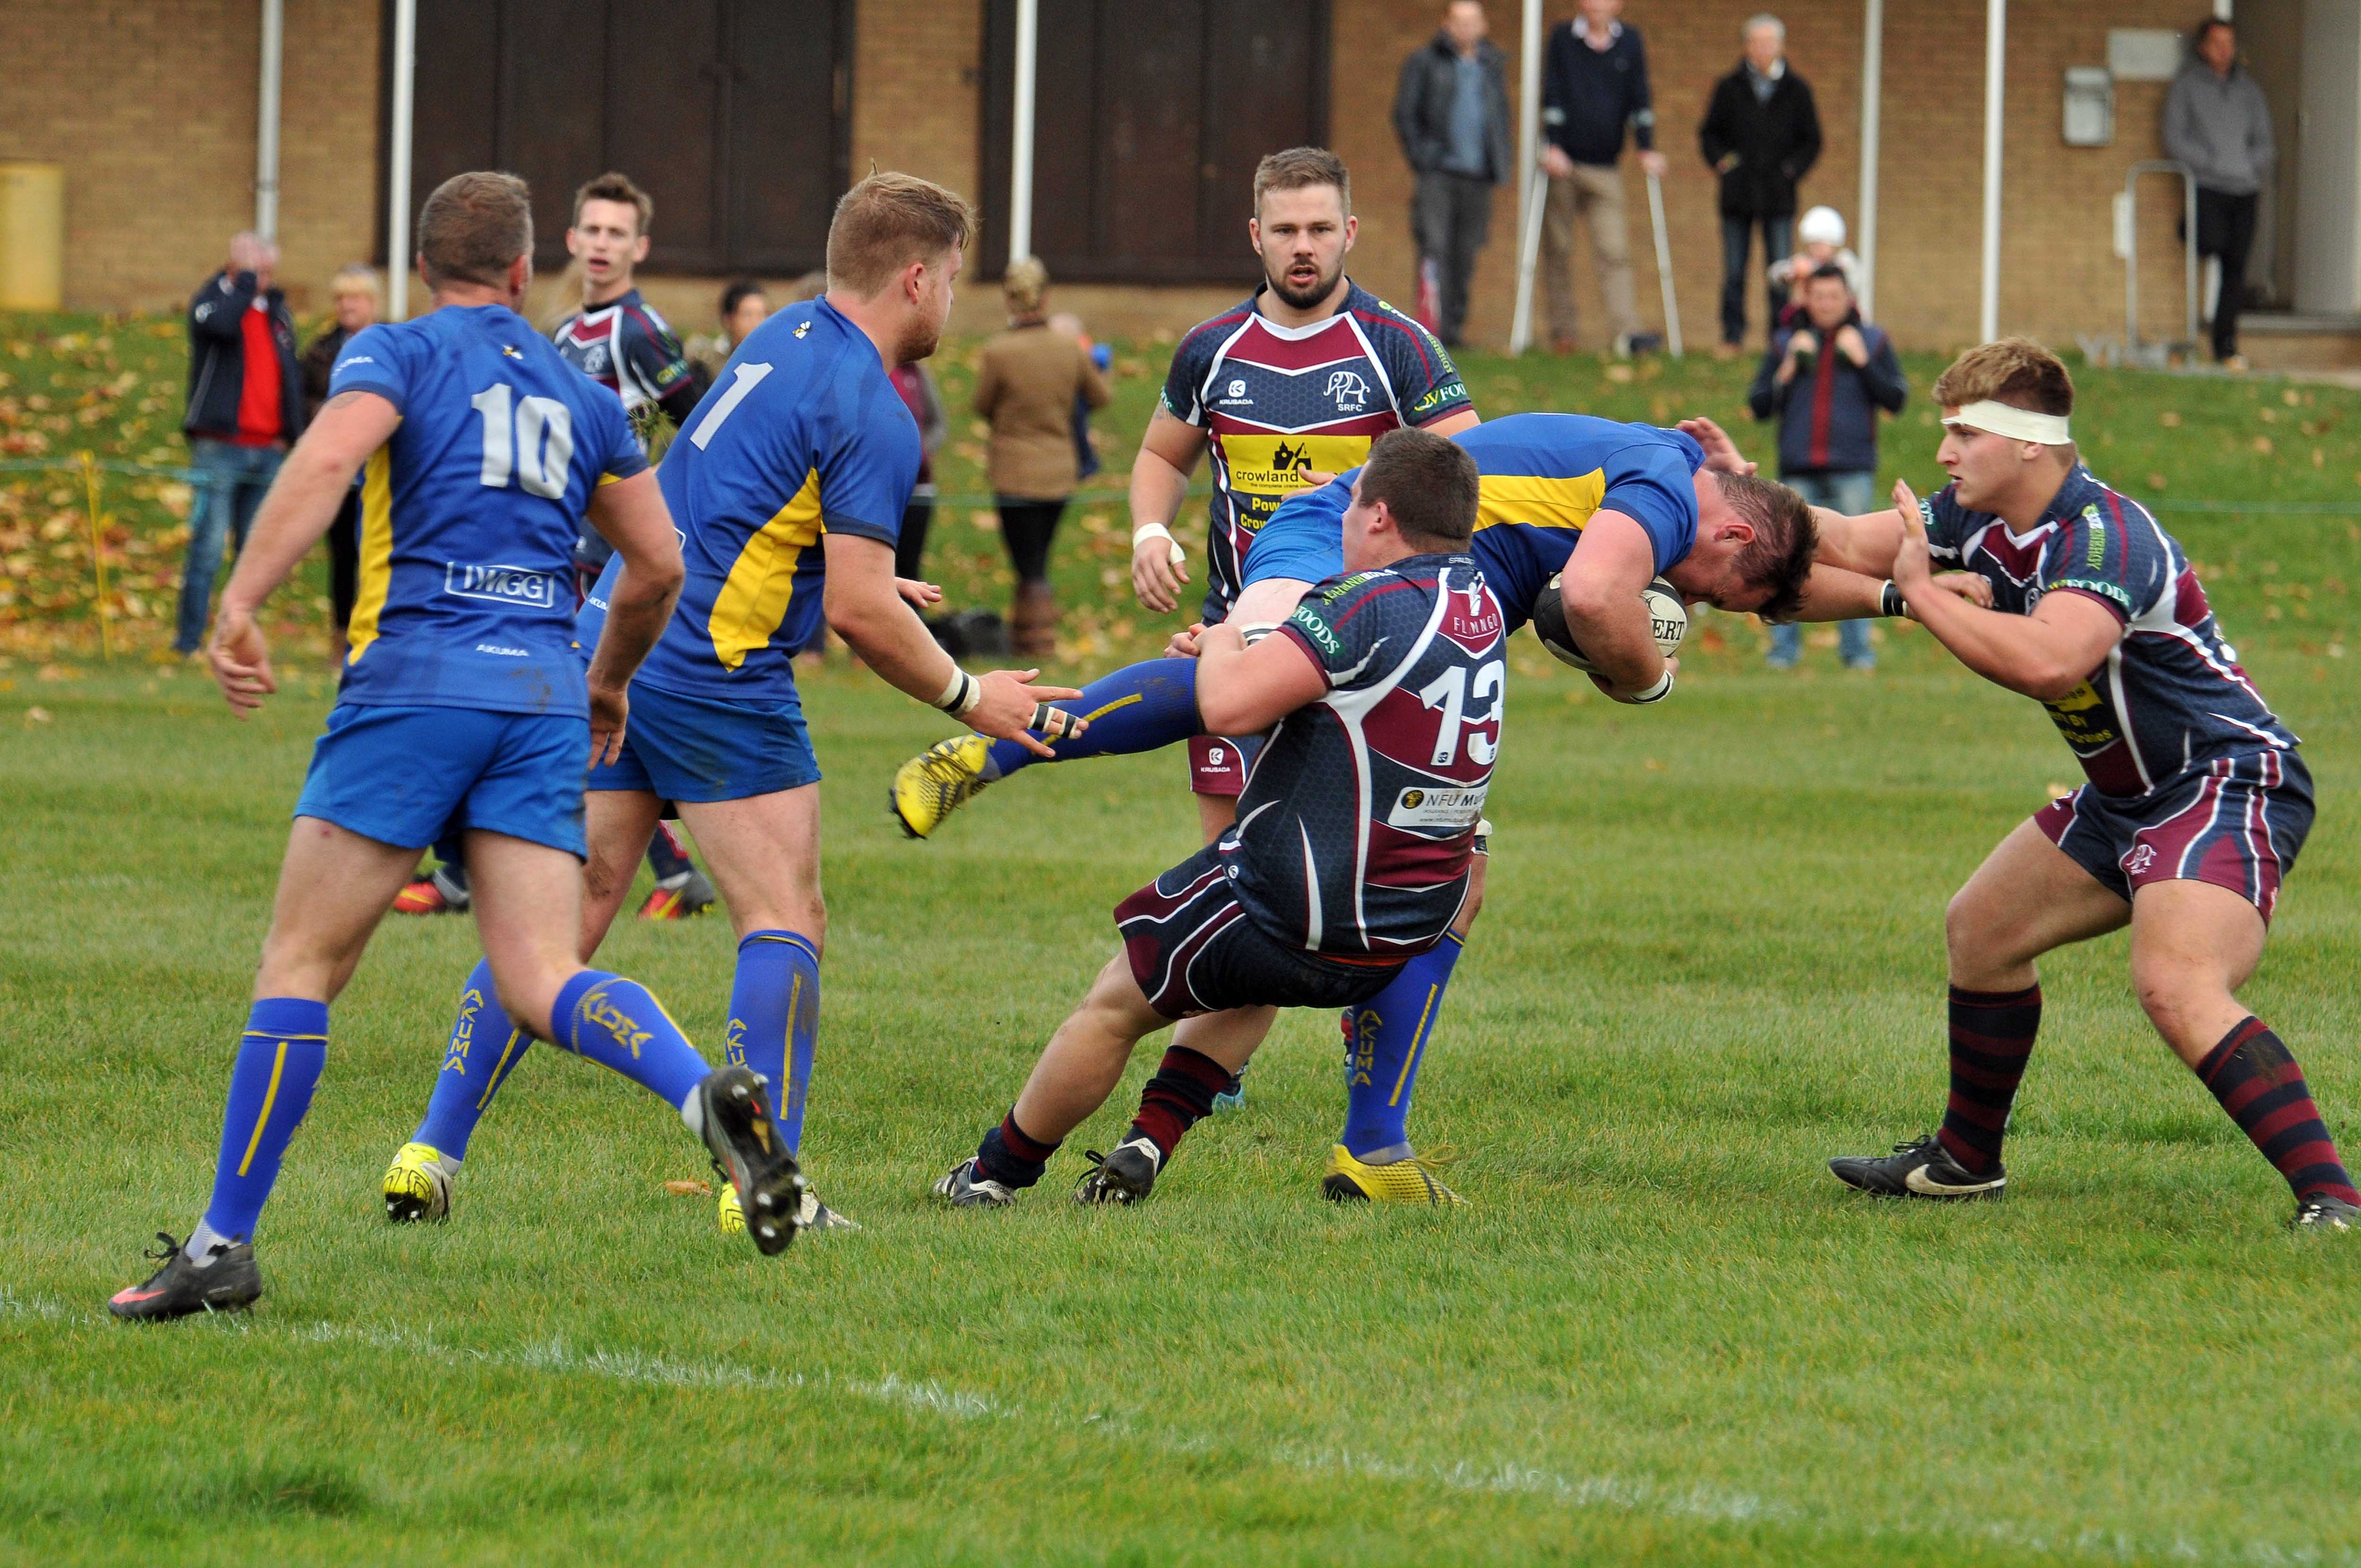 DOUBLE TEAM: Spalding RFC stop at Matlock attack on Saturday. Photo by ADRIAN SMITH